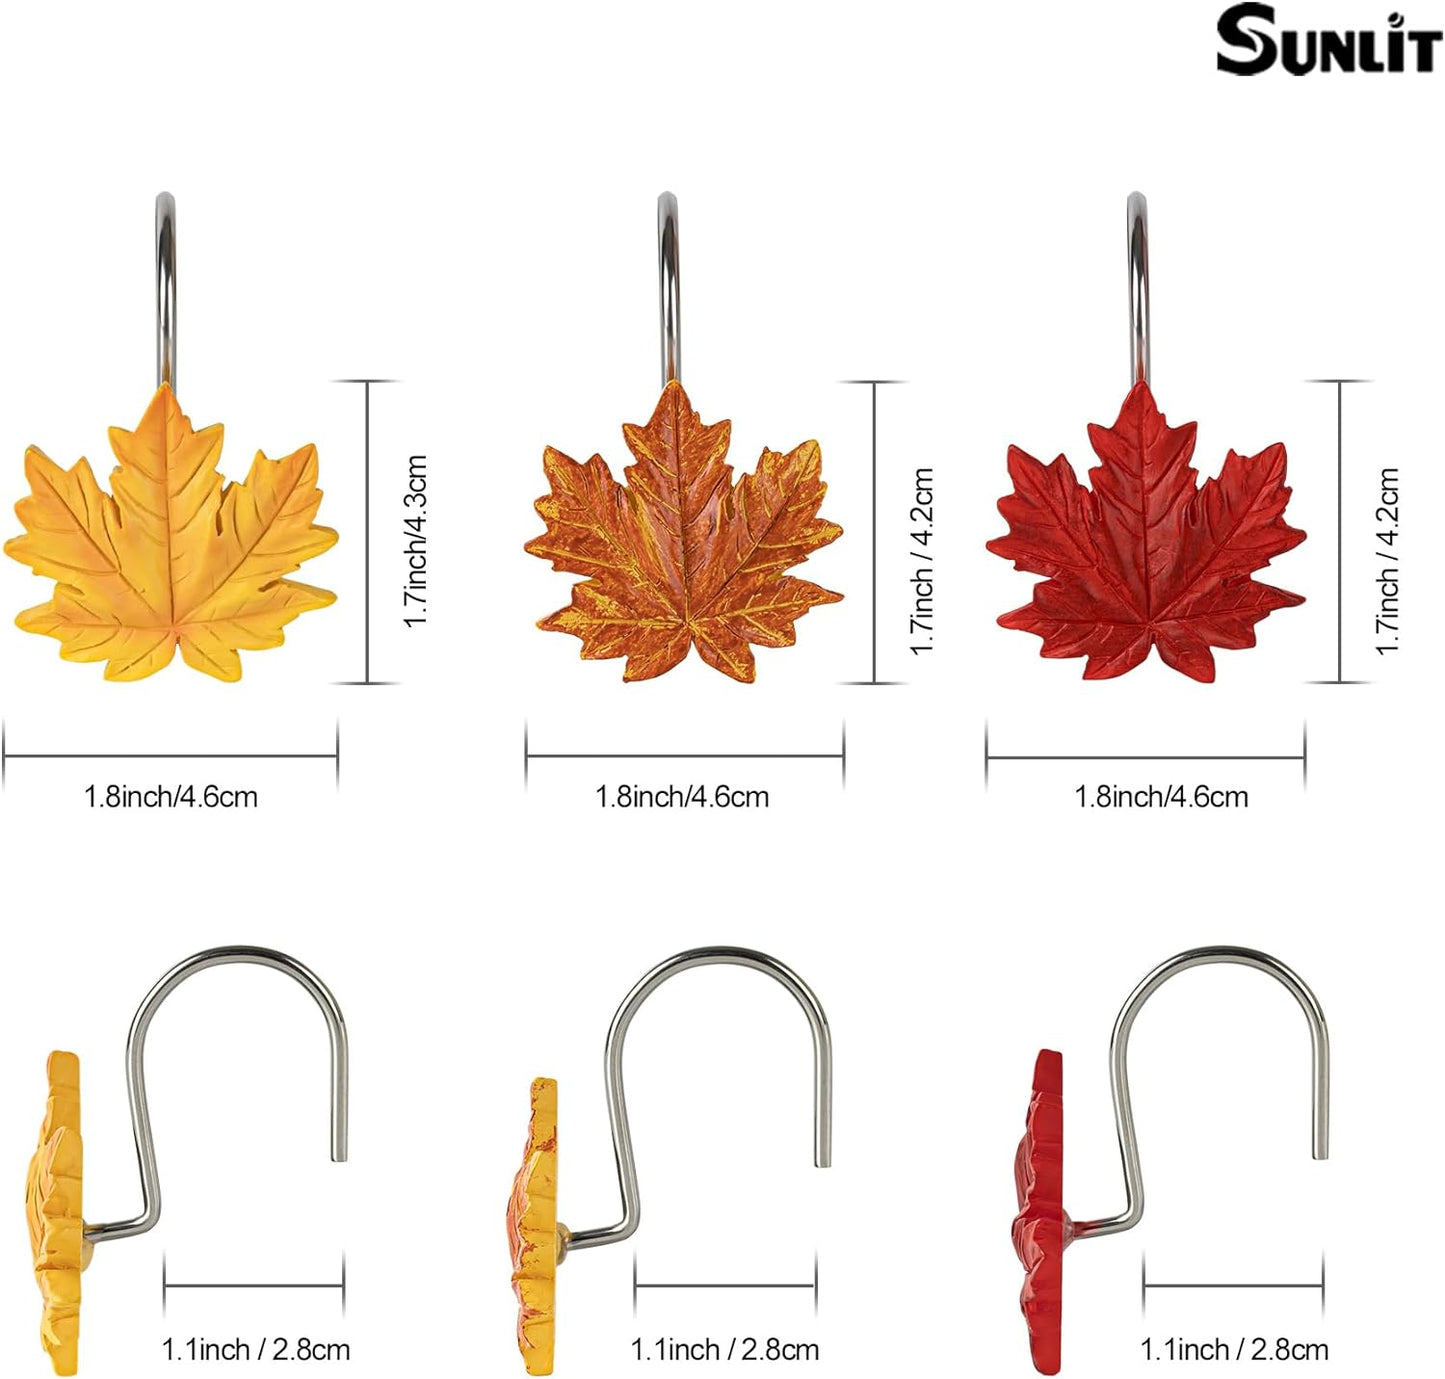 Sunlit Maple Leaf Shower Curtain Hooks for Fall Autumn, Home Decorative Shower Curtain Rings for Bathroom, Resin, Orange Red Maple Leaves Shower Curtain Hangers Hooks Bath Accessories, Set of 12